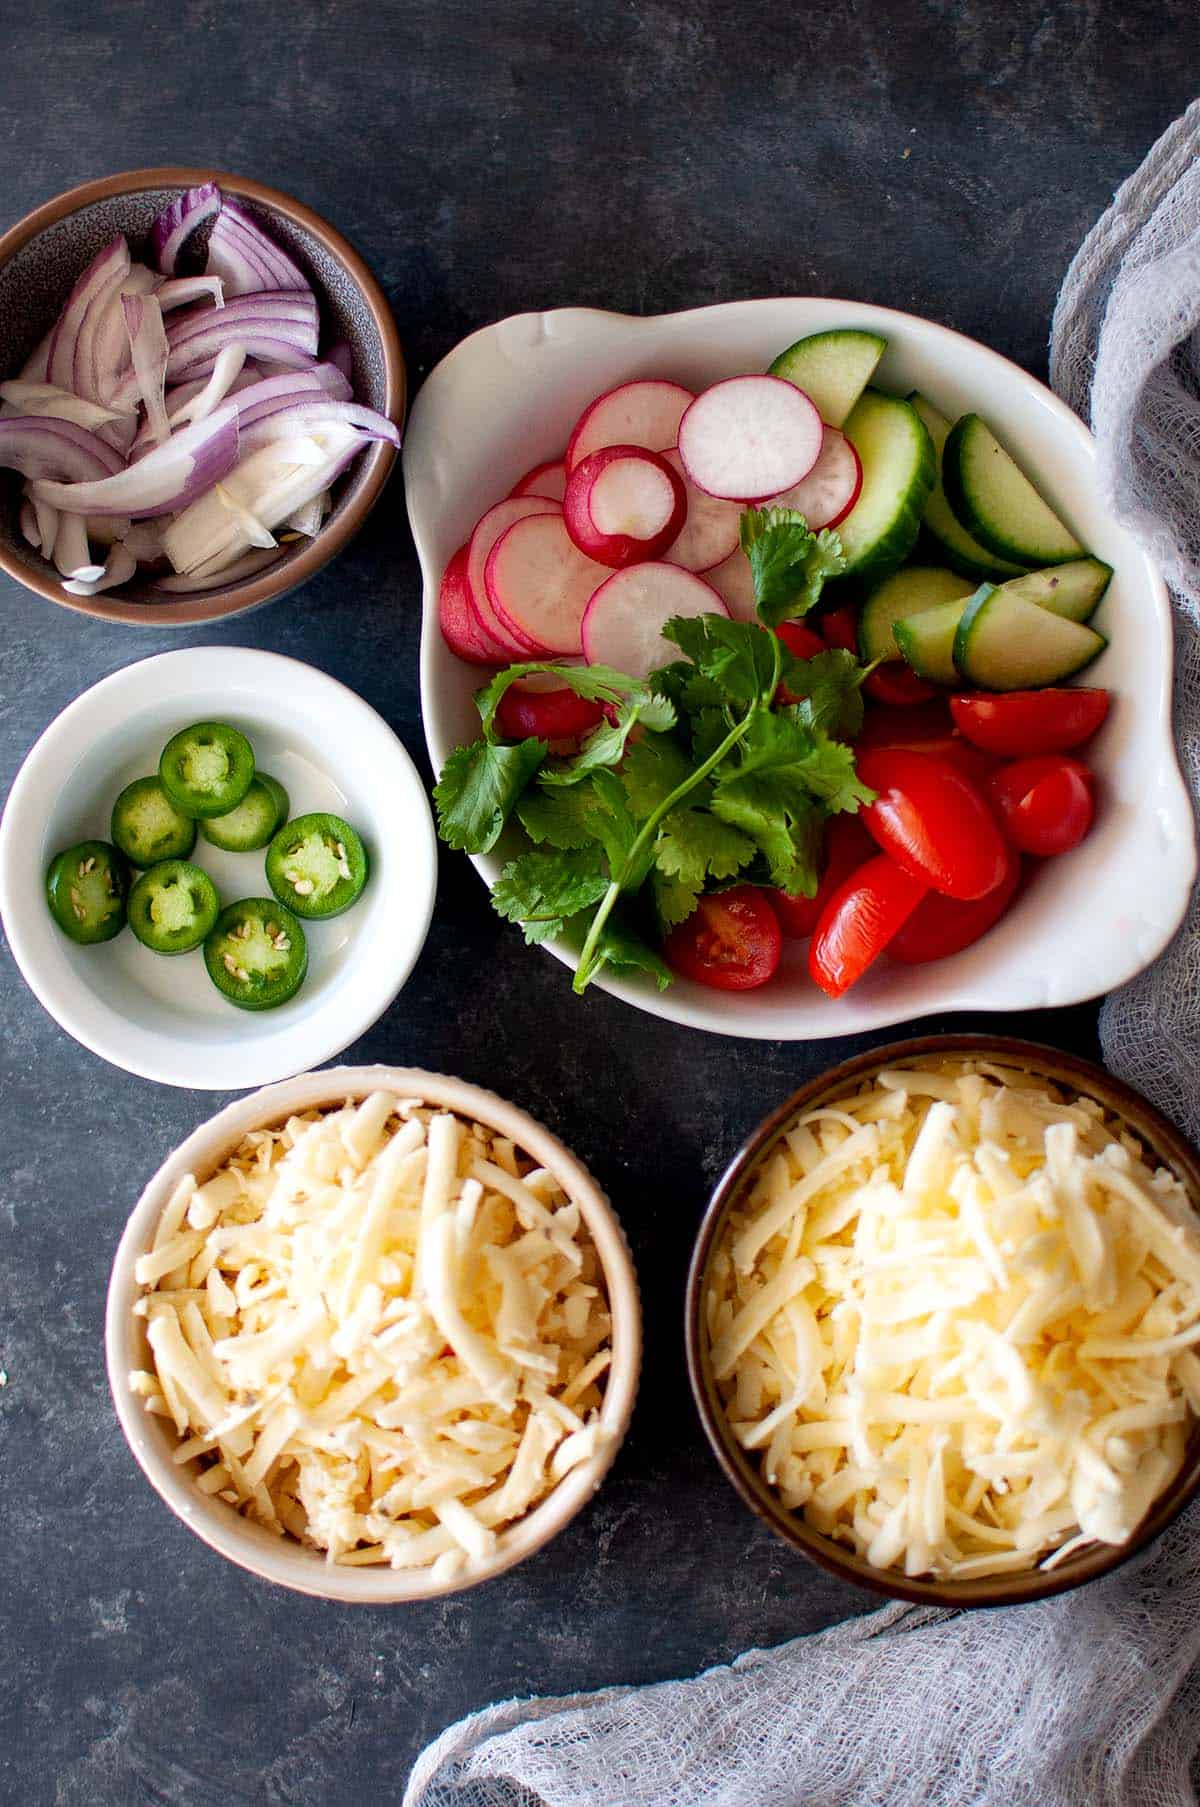 Bowls with fresh veggies, grated cheese, onions and jalapeno peppers.